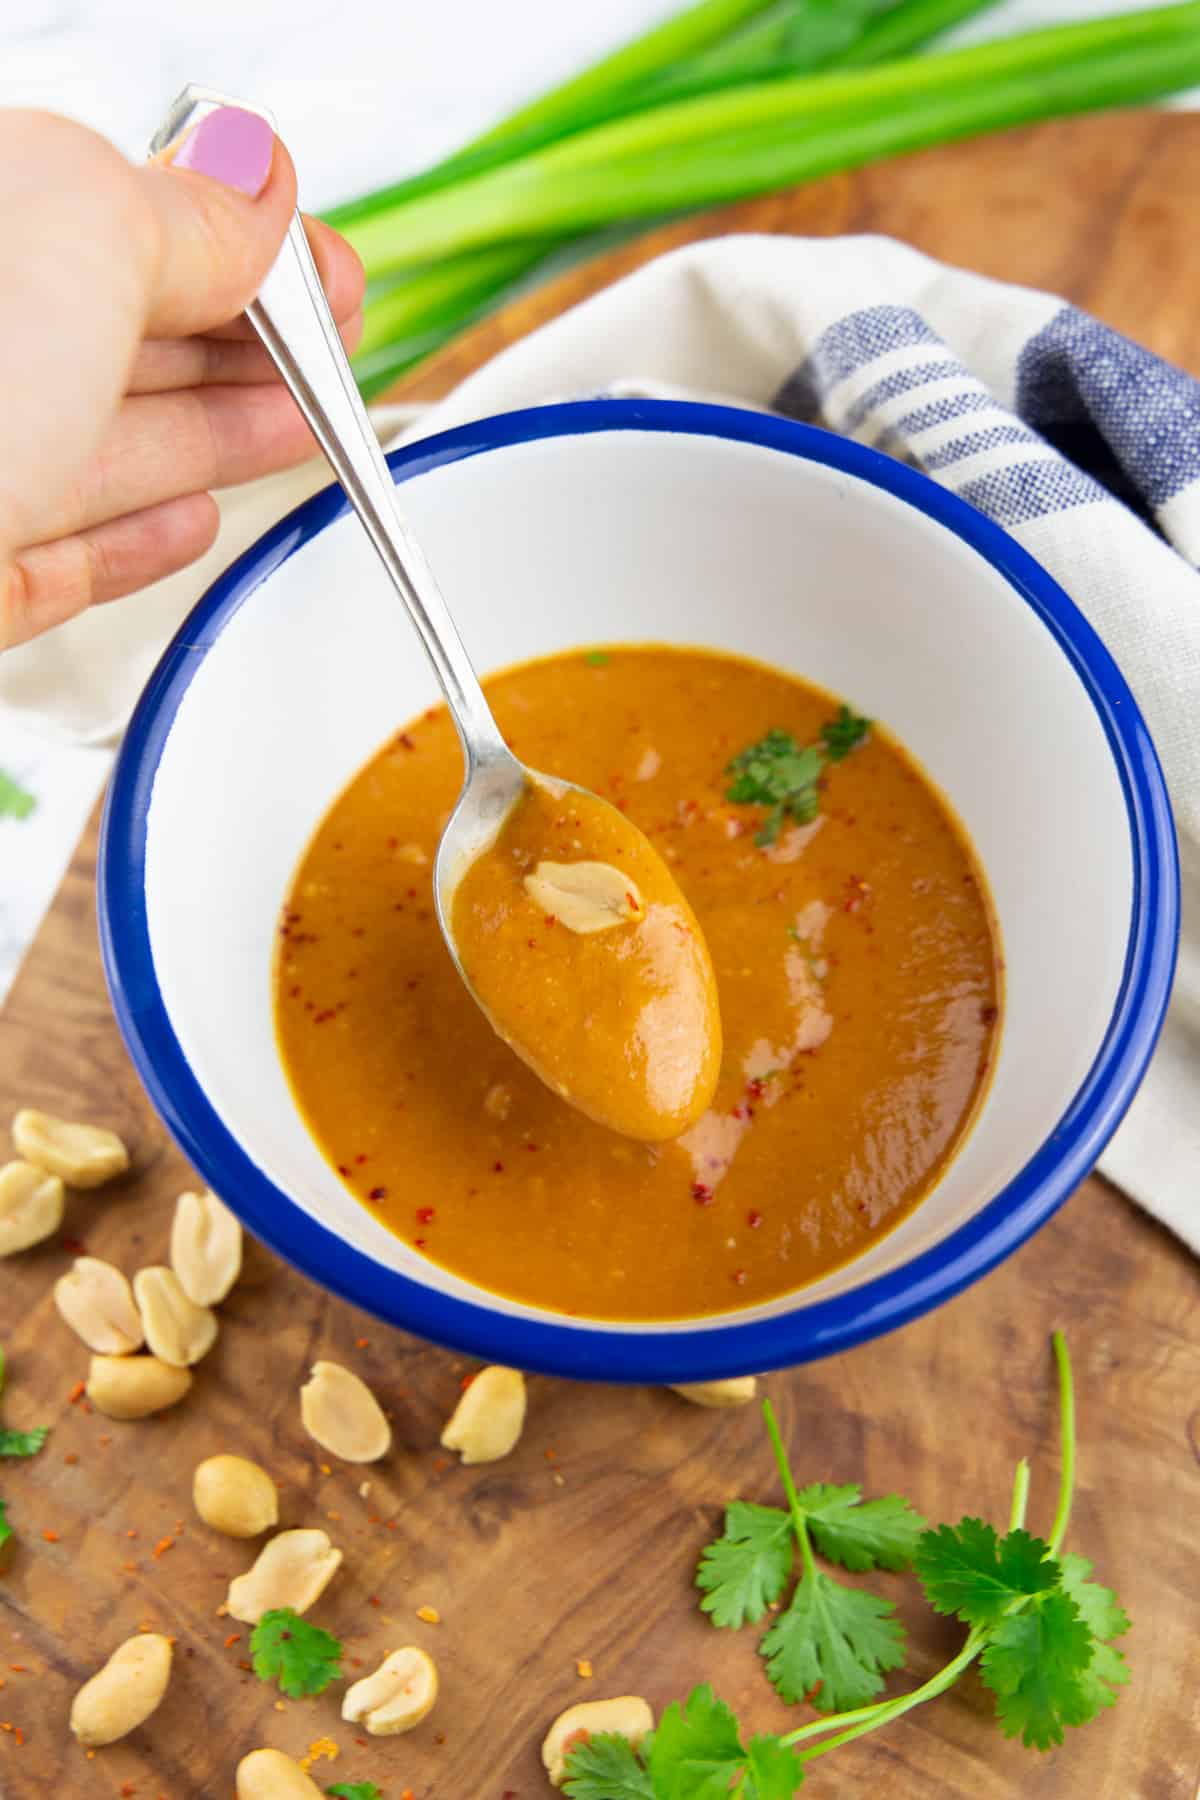 a hand dipping a spoon into a bowl of peanut sauce 